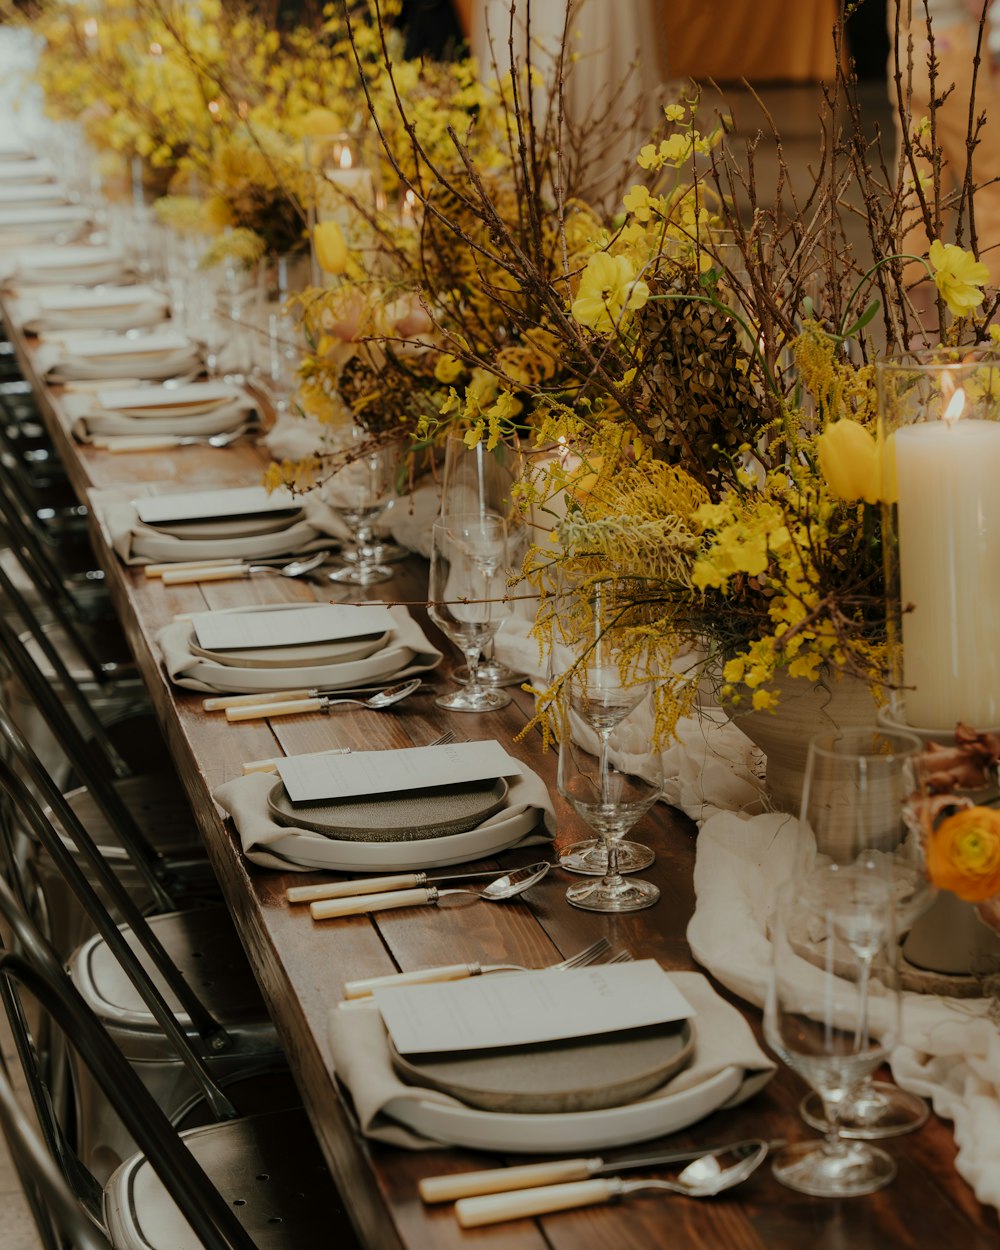 a long table is set with place settings and place settings